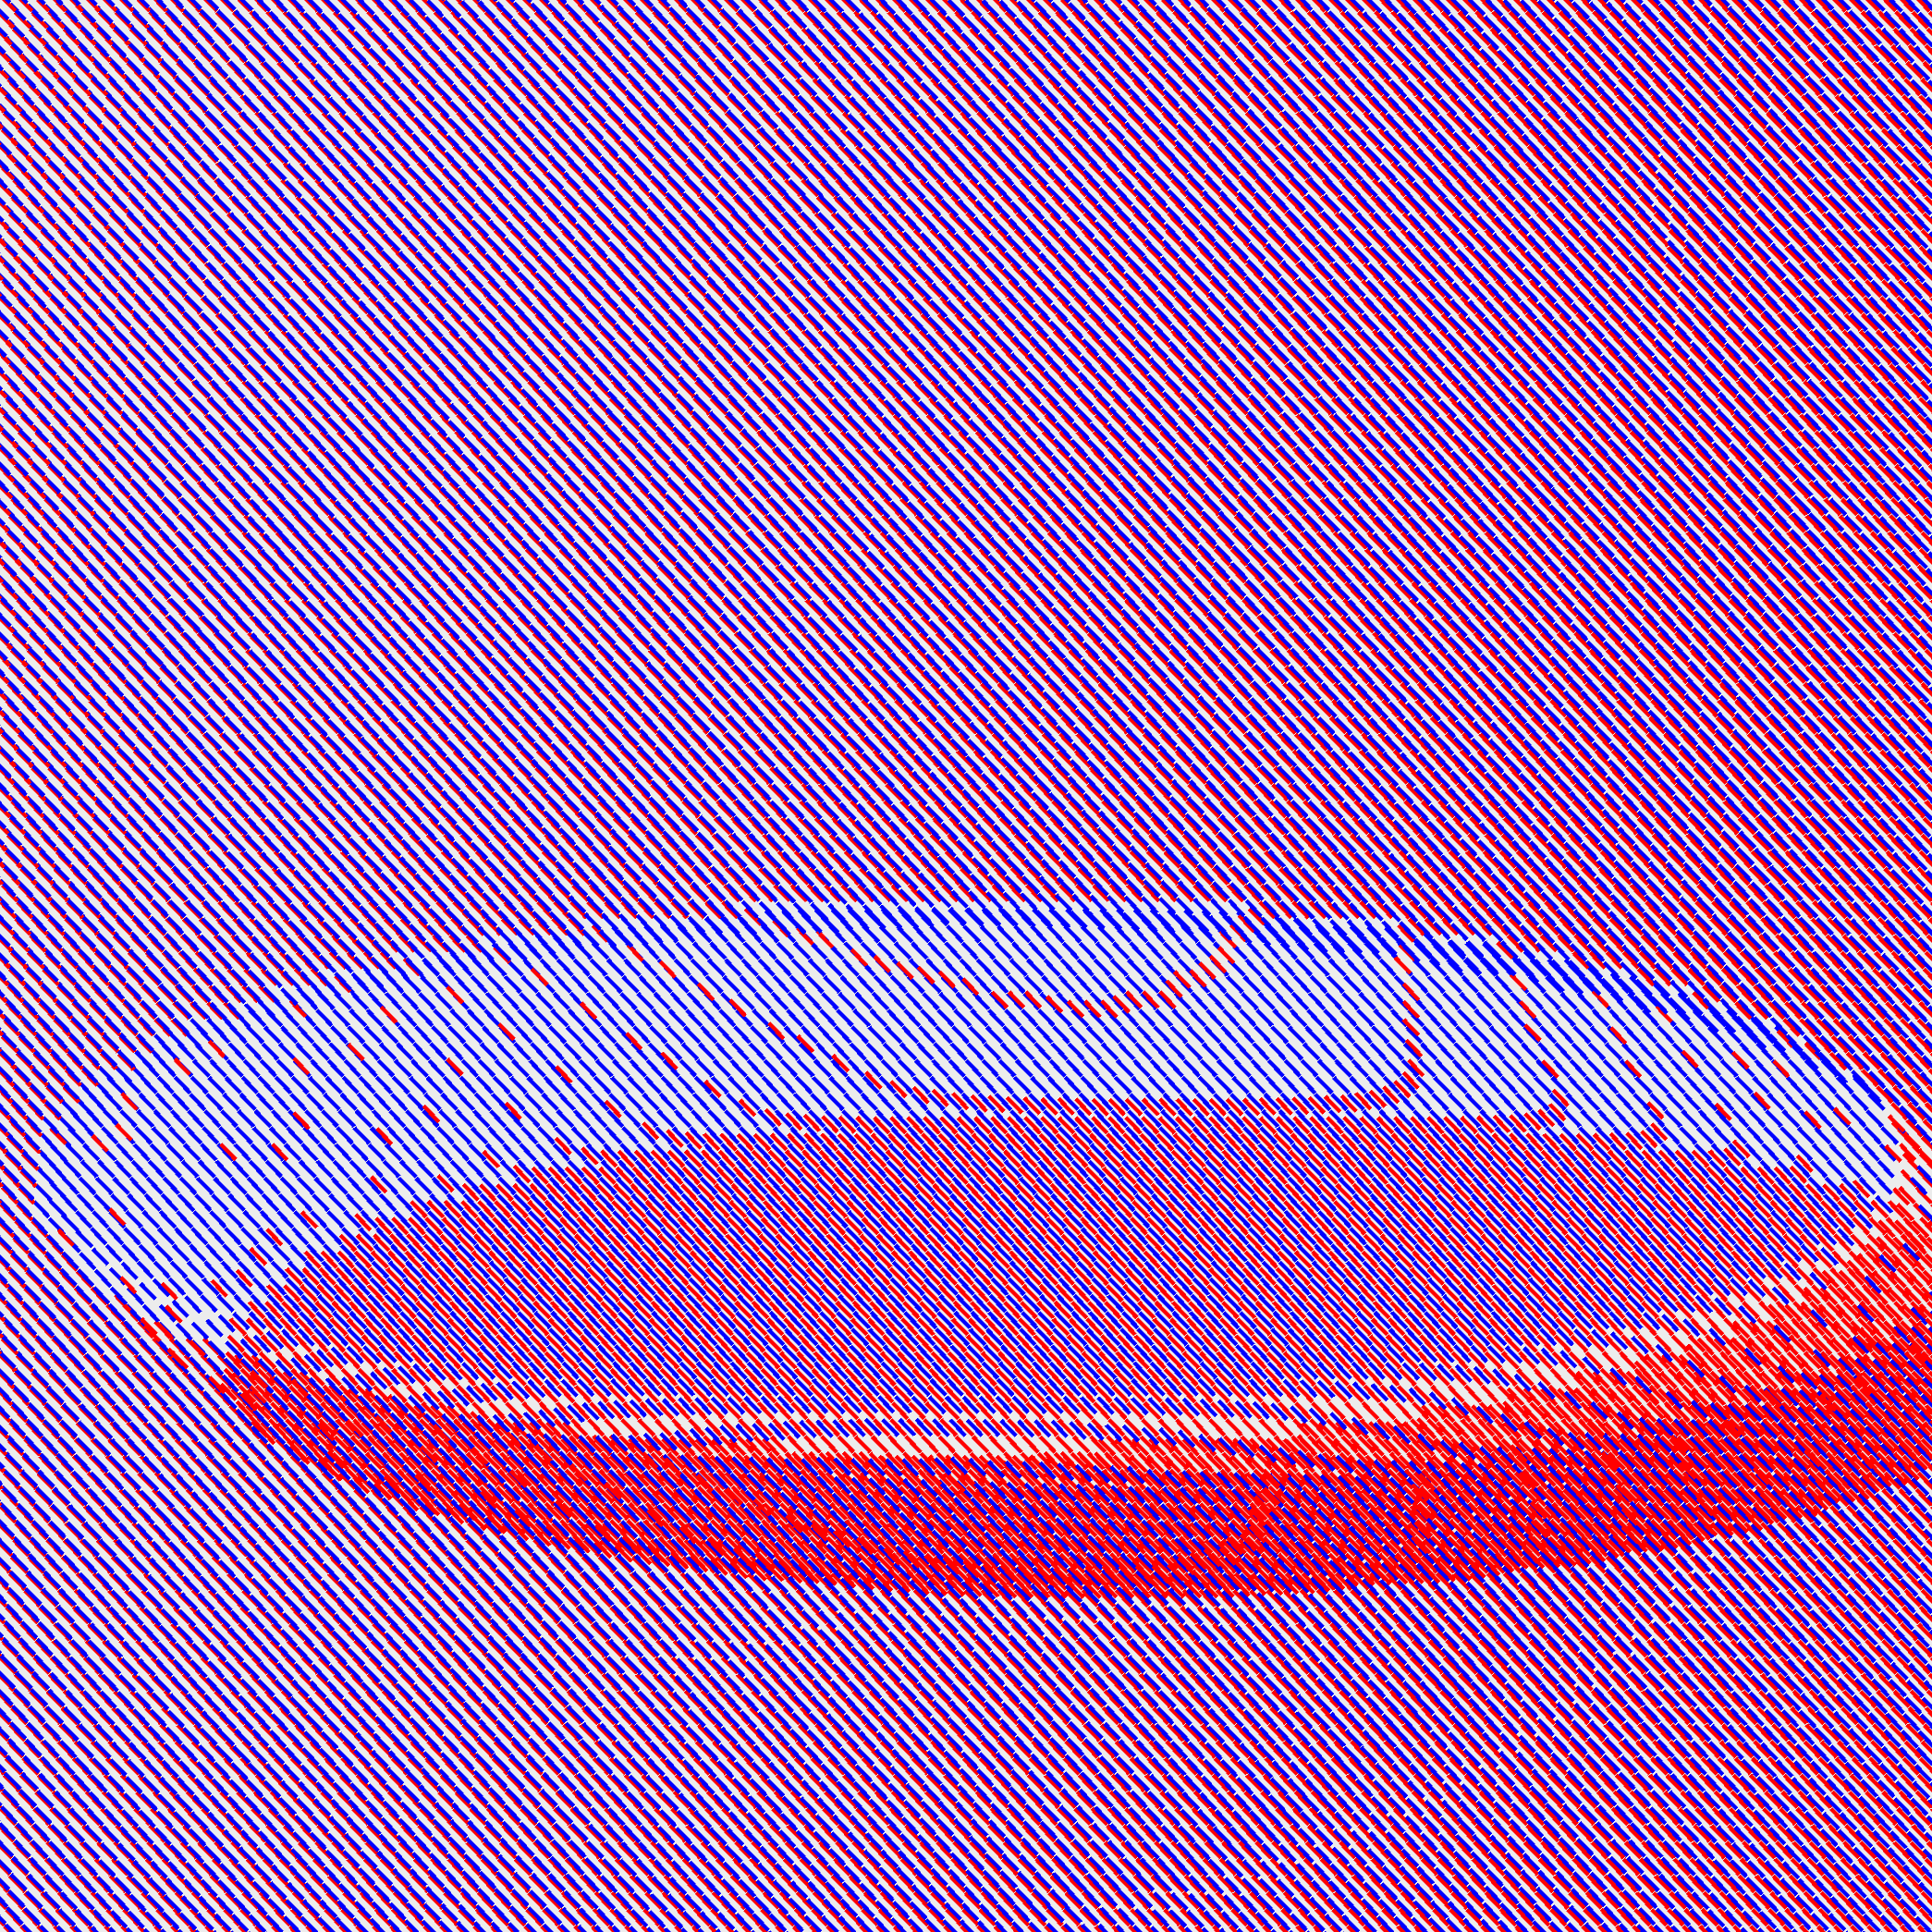 Digital image of a circular band that is red on the bottom and blue on the top against a purple-pink background